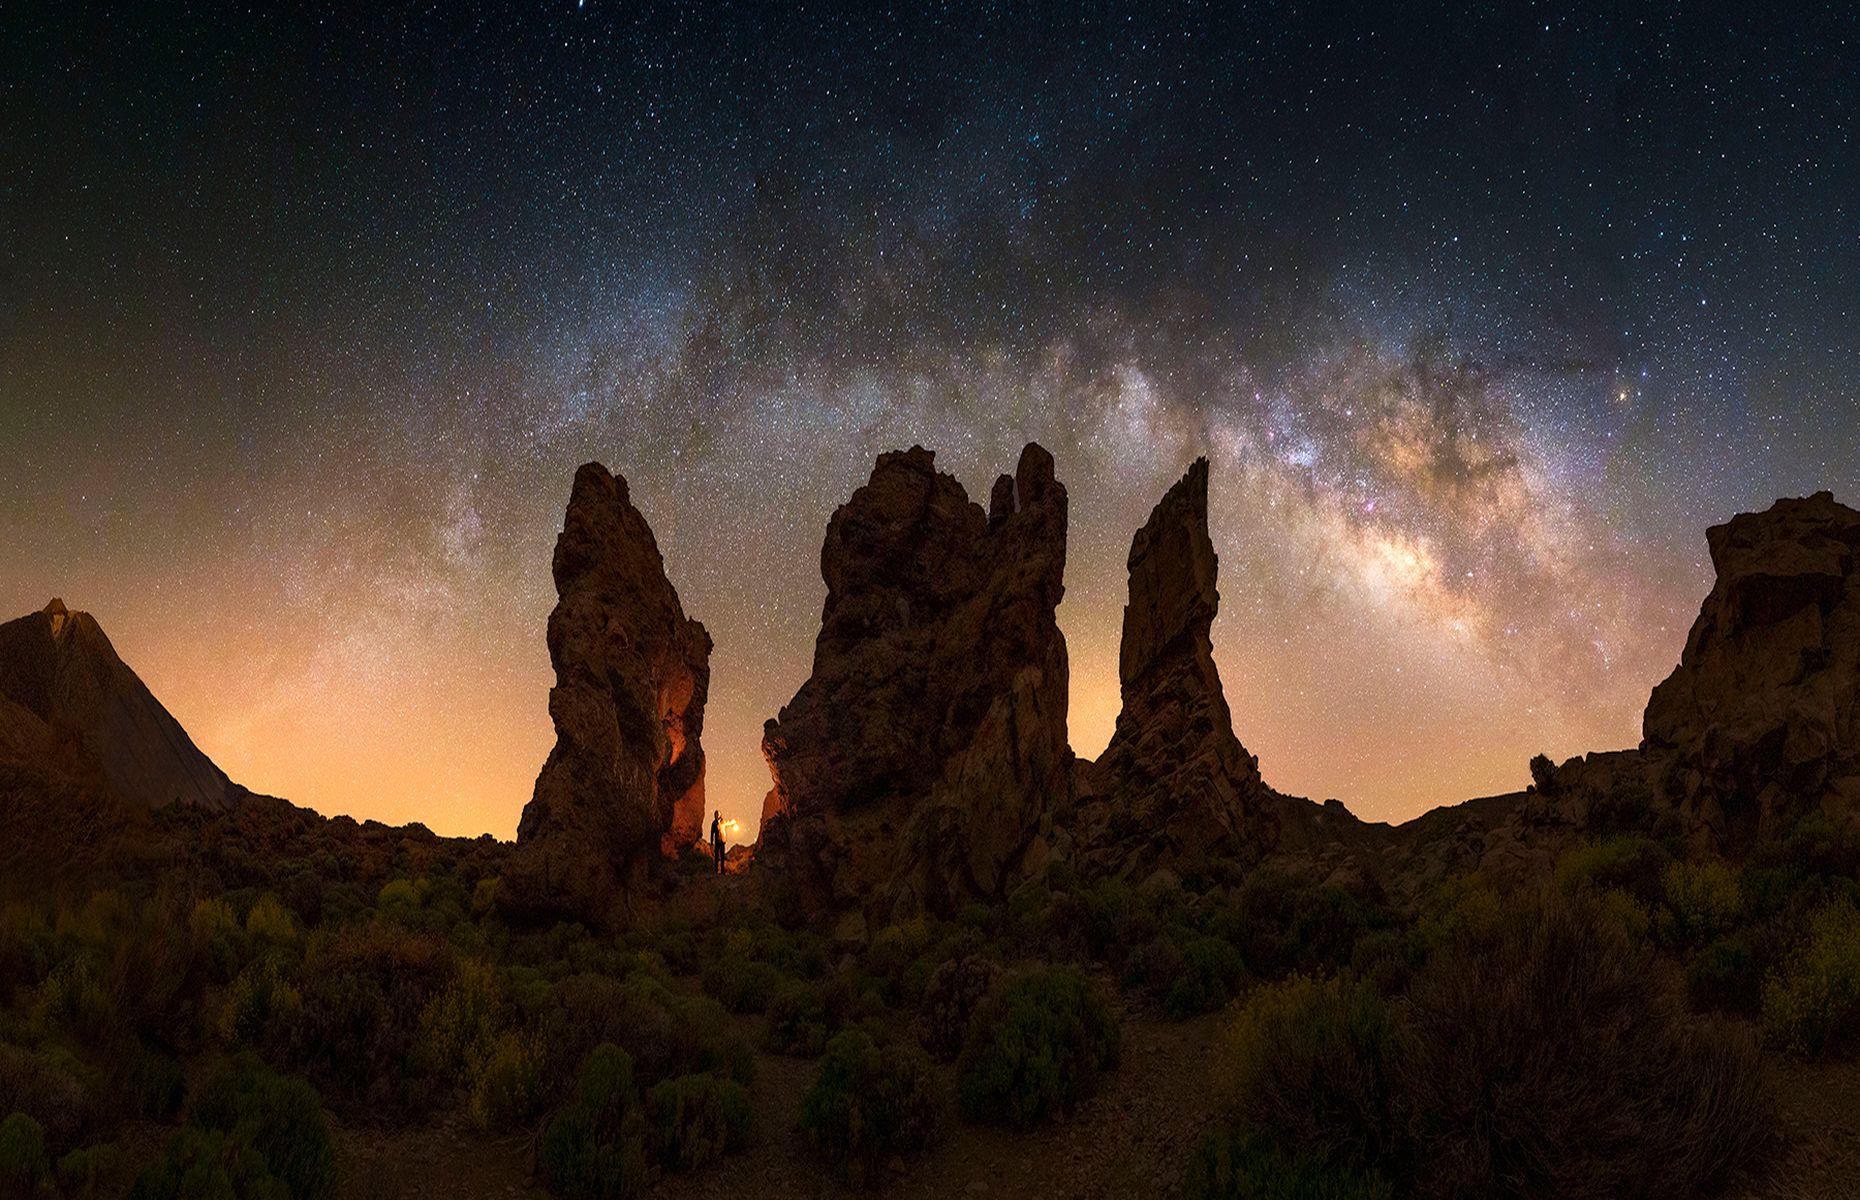 <p>Your kids may be crying out for theme parks, but you can’t beat the night sky for a spot of natural magic. A night-time tour at the <a href="https://www.webtenerife.co.uk/what-to-do/nature/stargazing/">Teide National Park</a> will have you and your family gazing in awe at bright stars, planets and the Milky Way, all twinkling away in the darkness and uninhibited by light pollution. Hang around and there’s also plenty to do during the day, with volcanic crater hikes and cable car rides up Teide – Spain’s highest mountain at 12,200 feet (3,718m).</p>  <p><a href="https://www.loveexploring.com/galleries/73178/the-worlds-most-famous-volcanoes?page=1"><strong>These are the world's most famous volcanoes</strong></a></p>